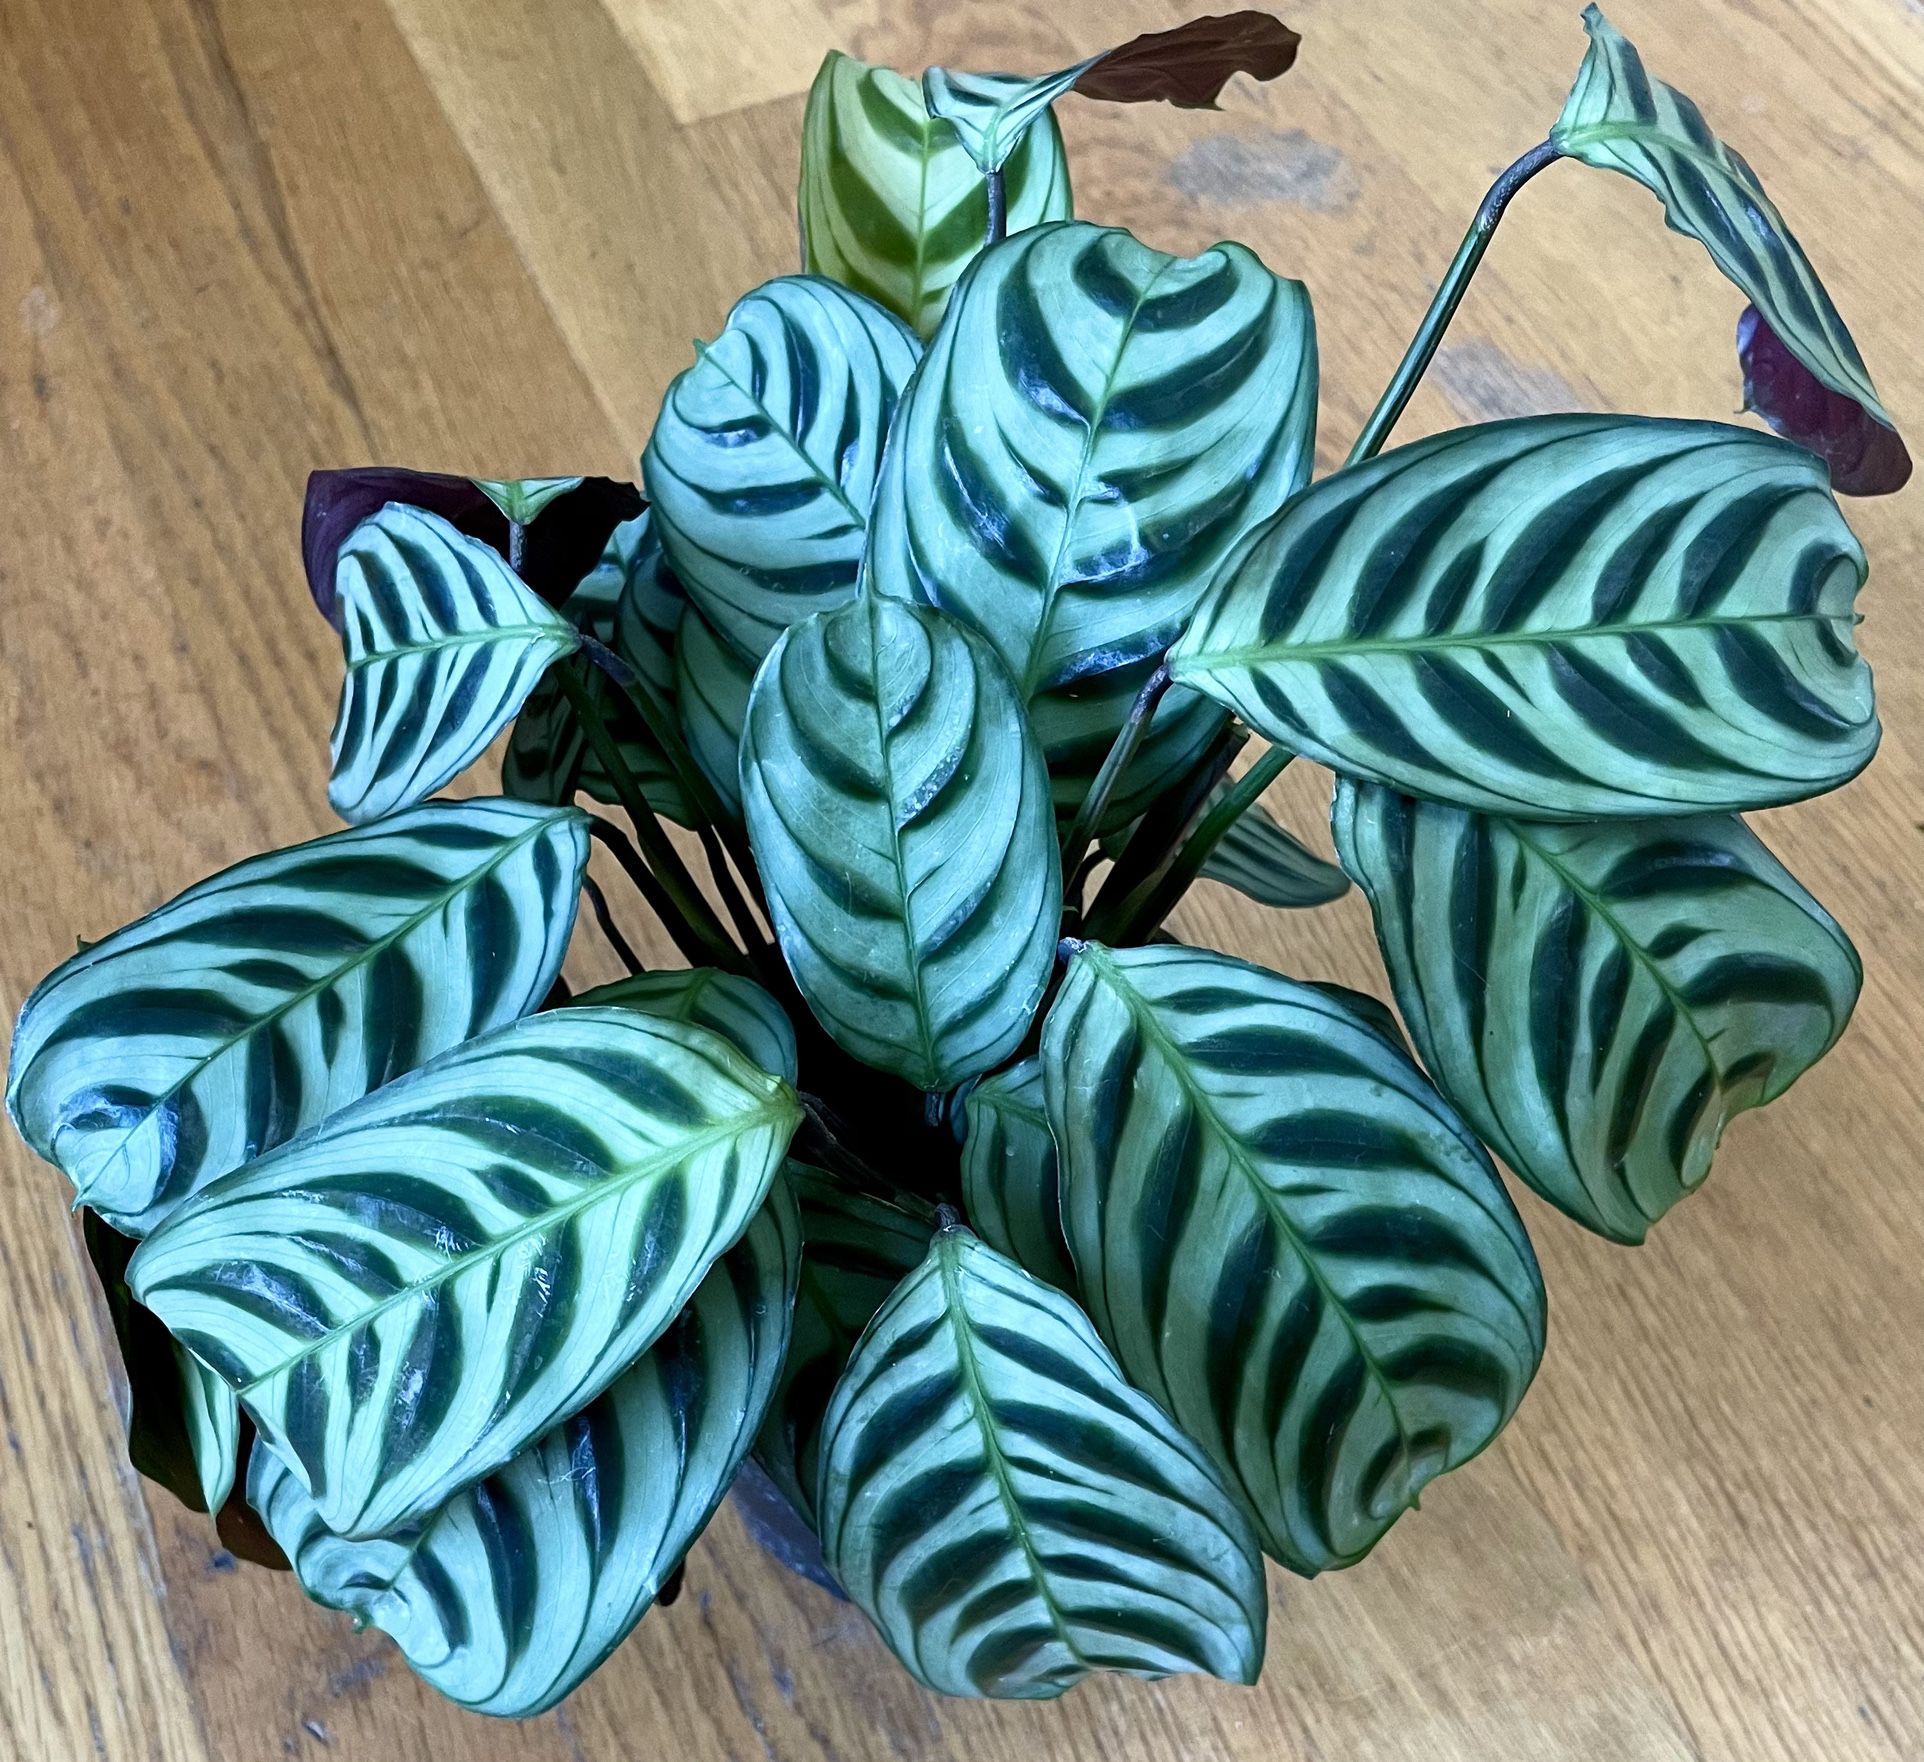 Non-Toxic Calathea Burle Marx Plant / Free Delivery Available 